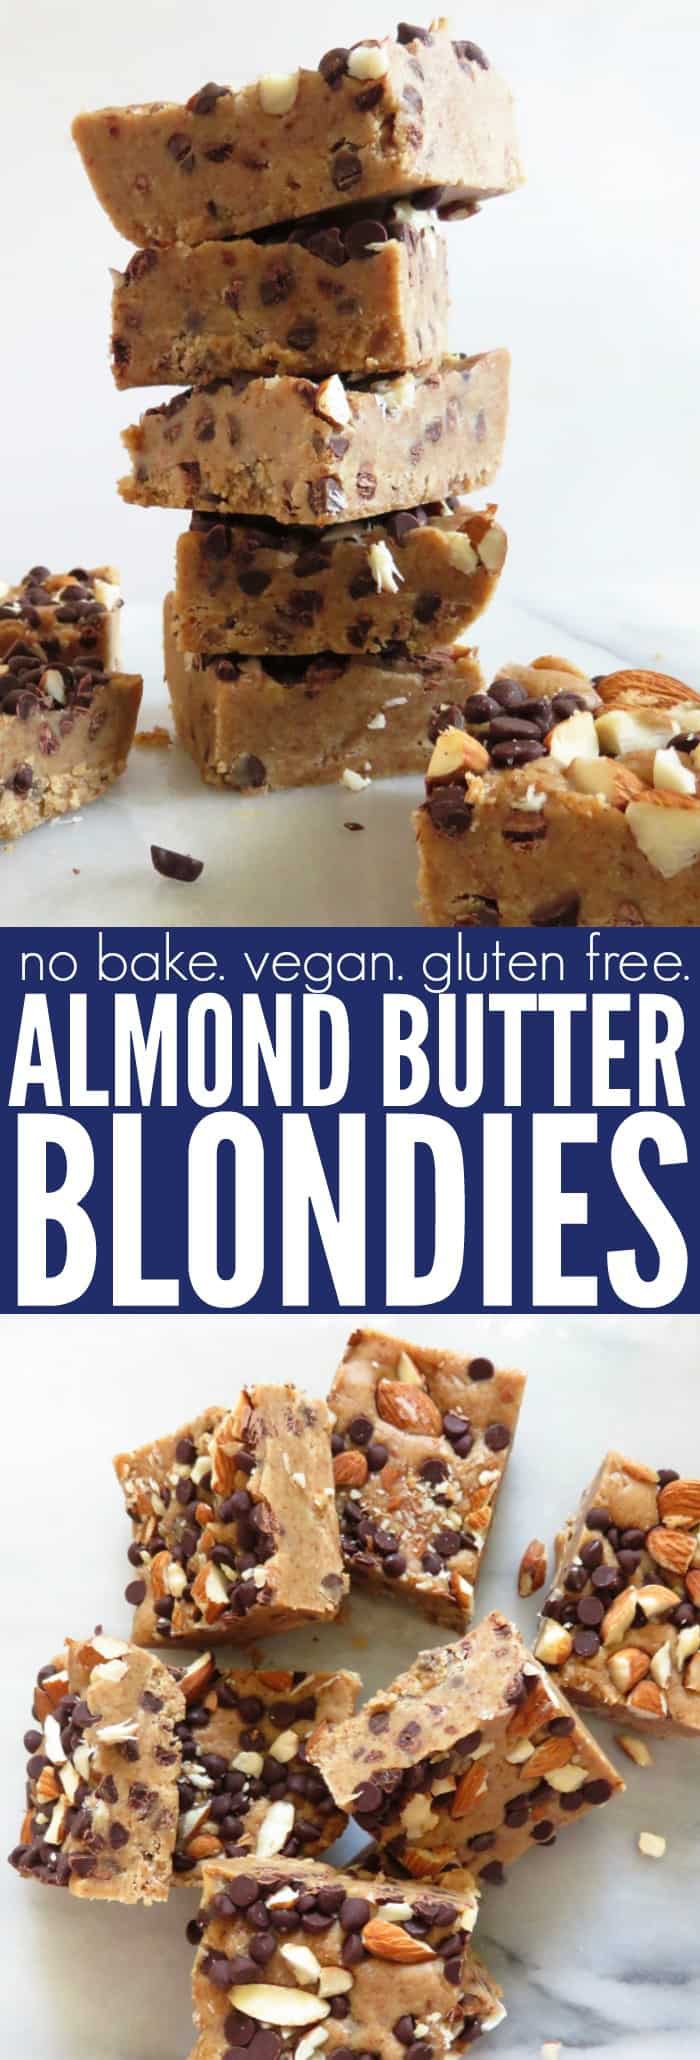 Easy and delicious No Bake Almond Butter Blondies made from only a handful of ingredients!! They're vegan, low glycemic, gluten free, and so fun! thetoastedpinenut.com